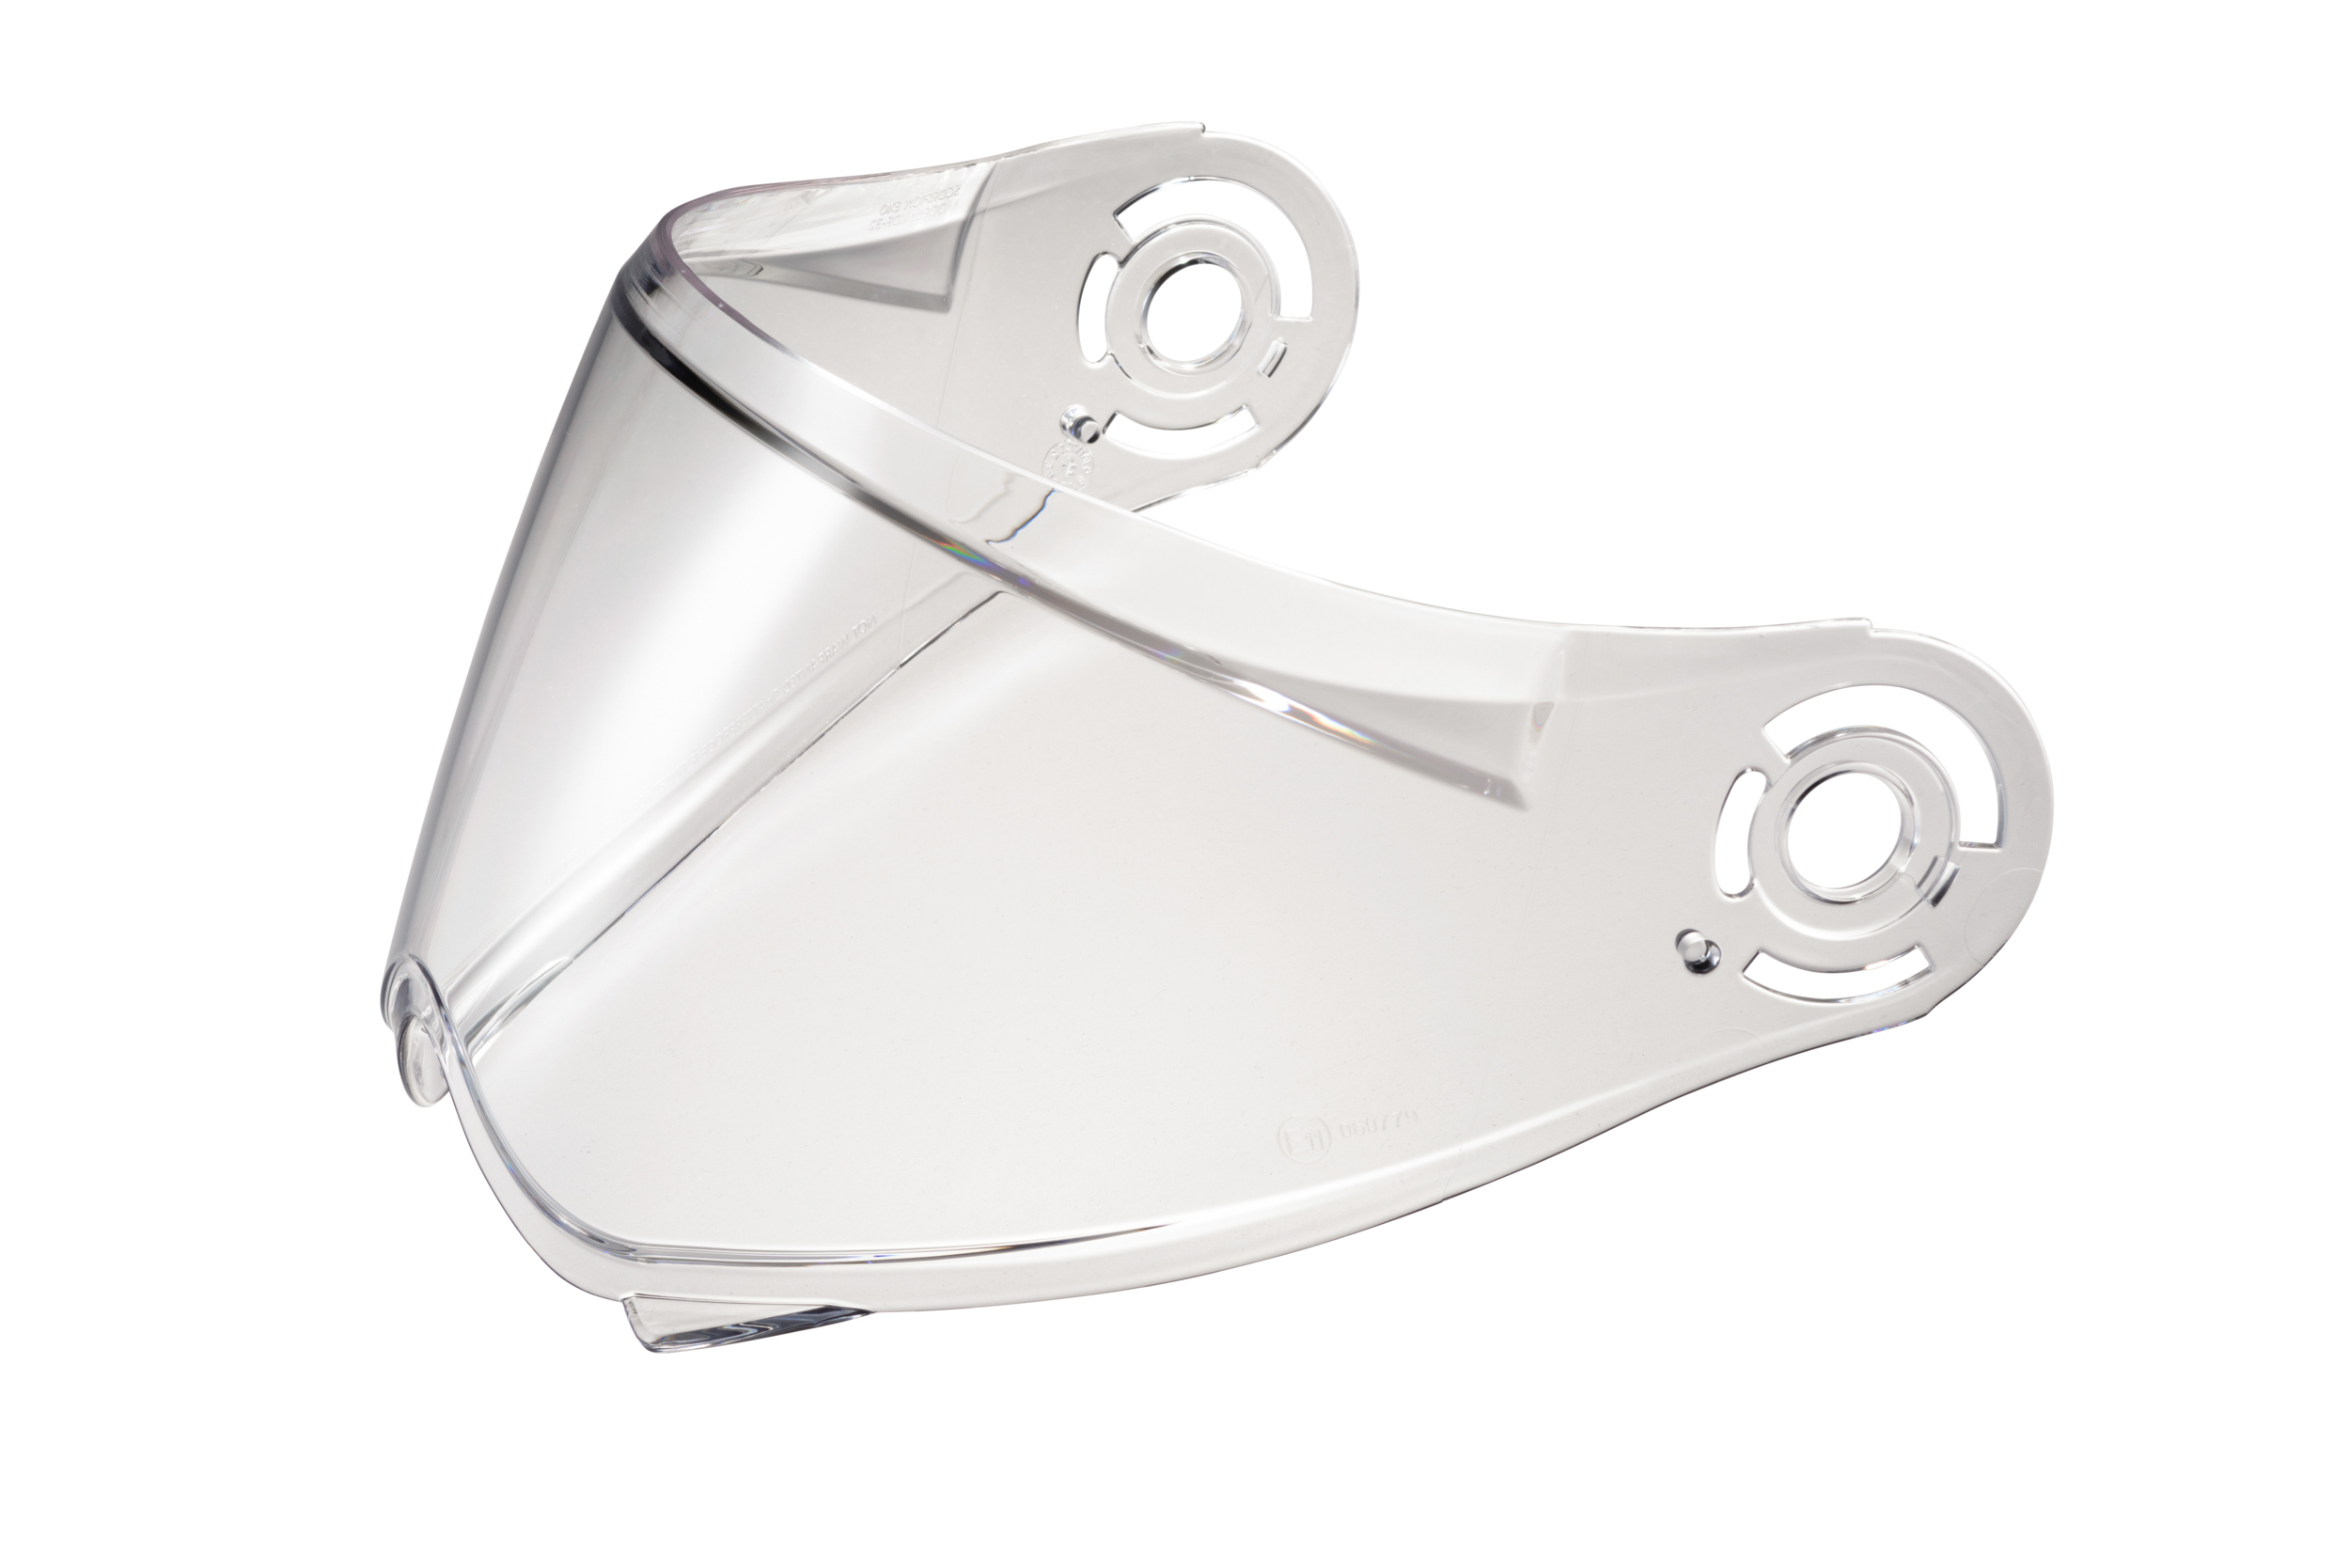 Scorpion Exo - Exo-at960 Faceshield Clear - 52-960-50